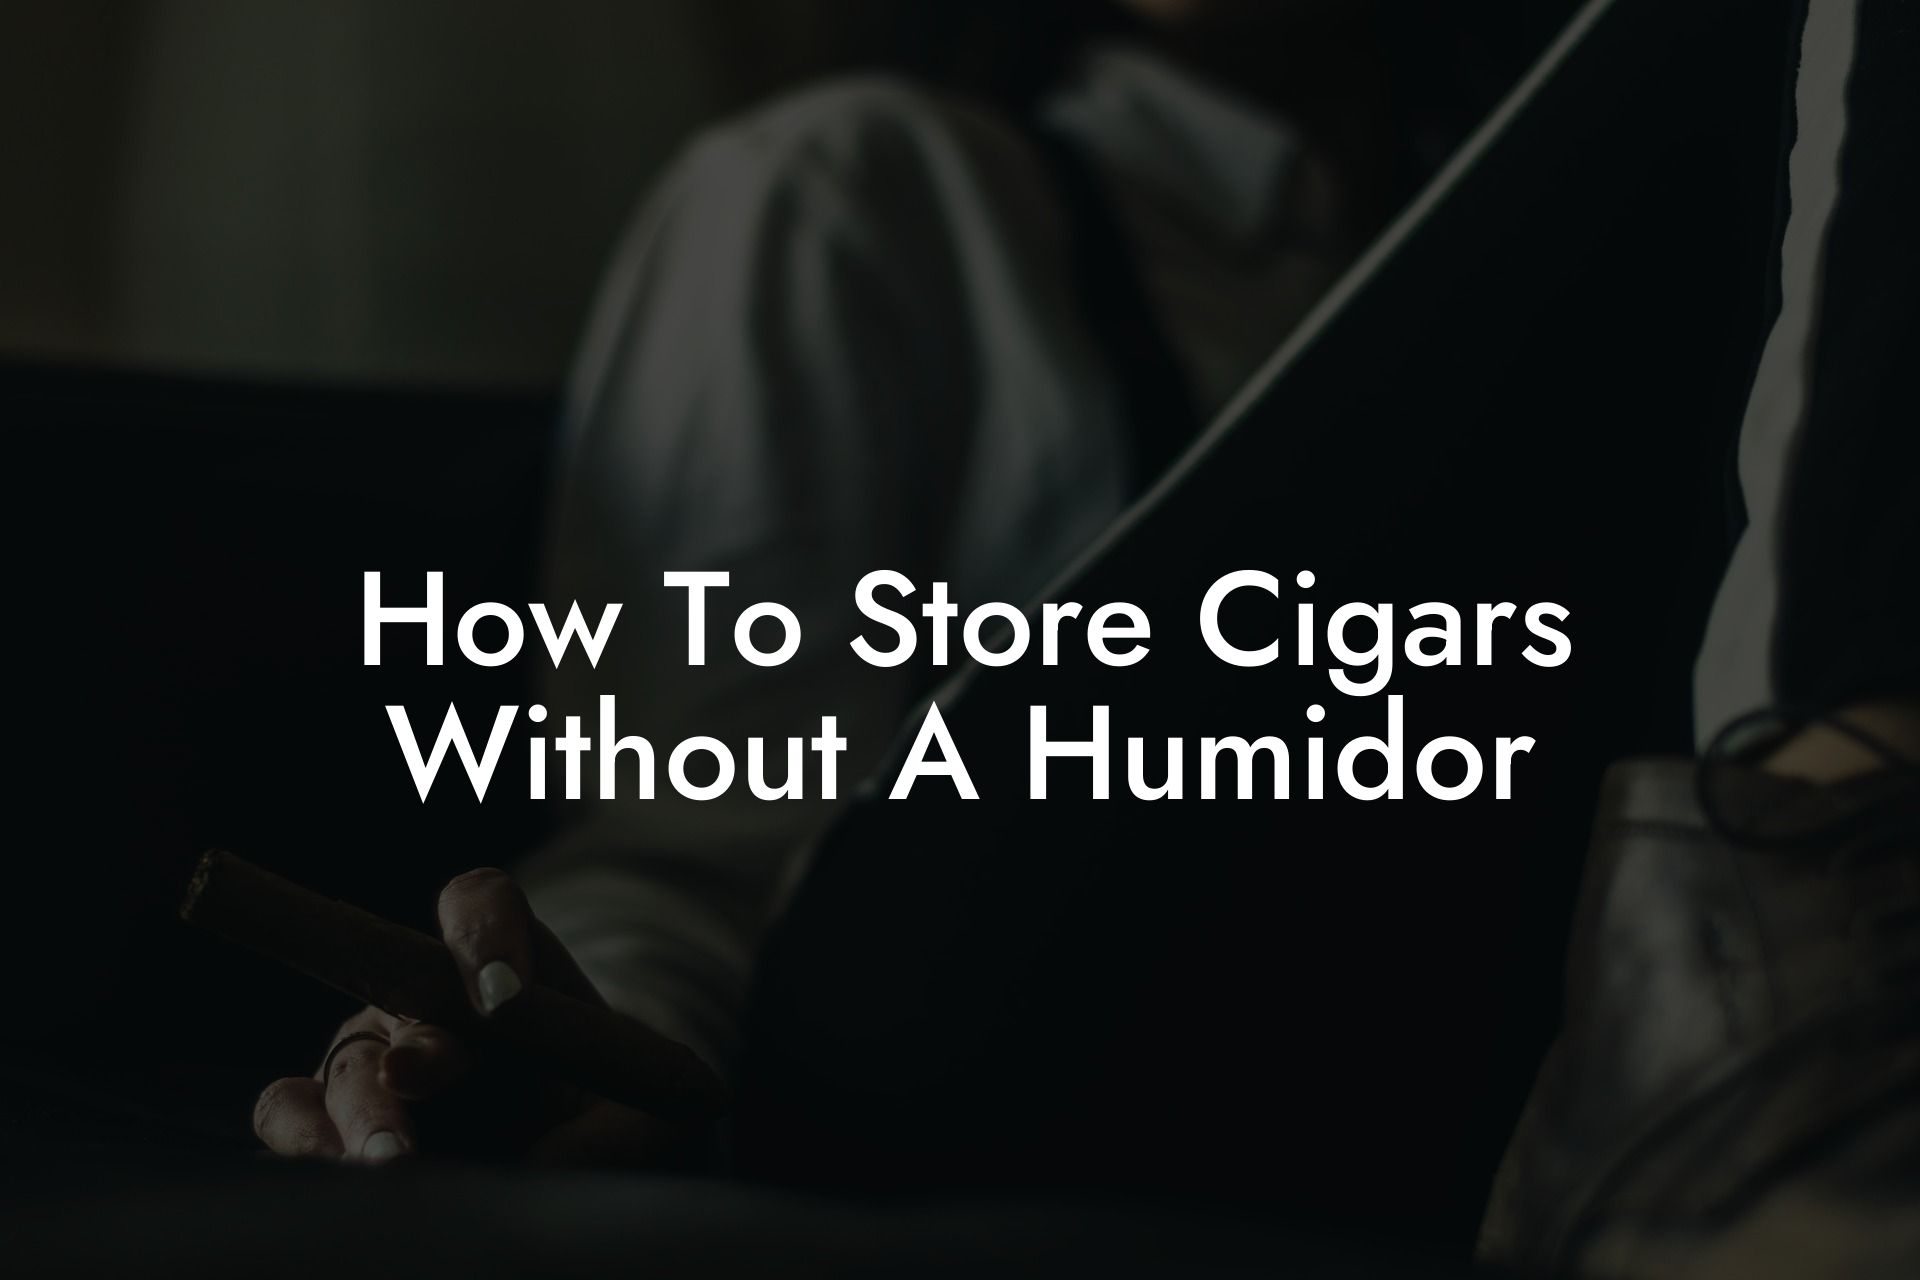 How To Store Cigars Without A Humidor